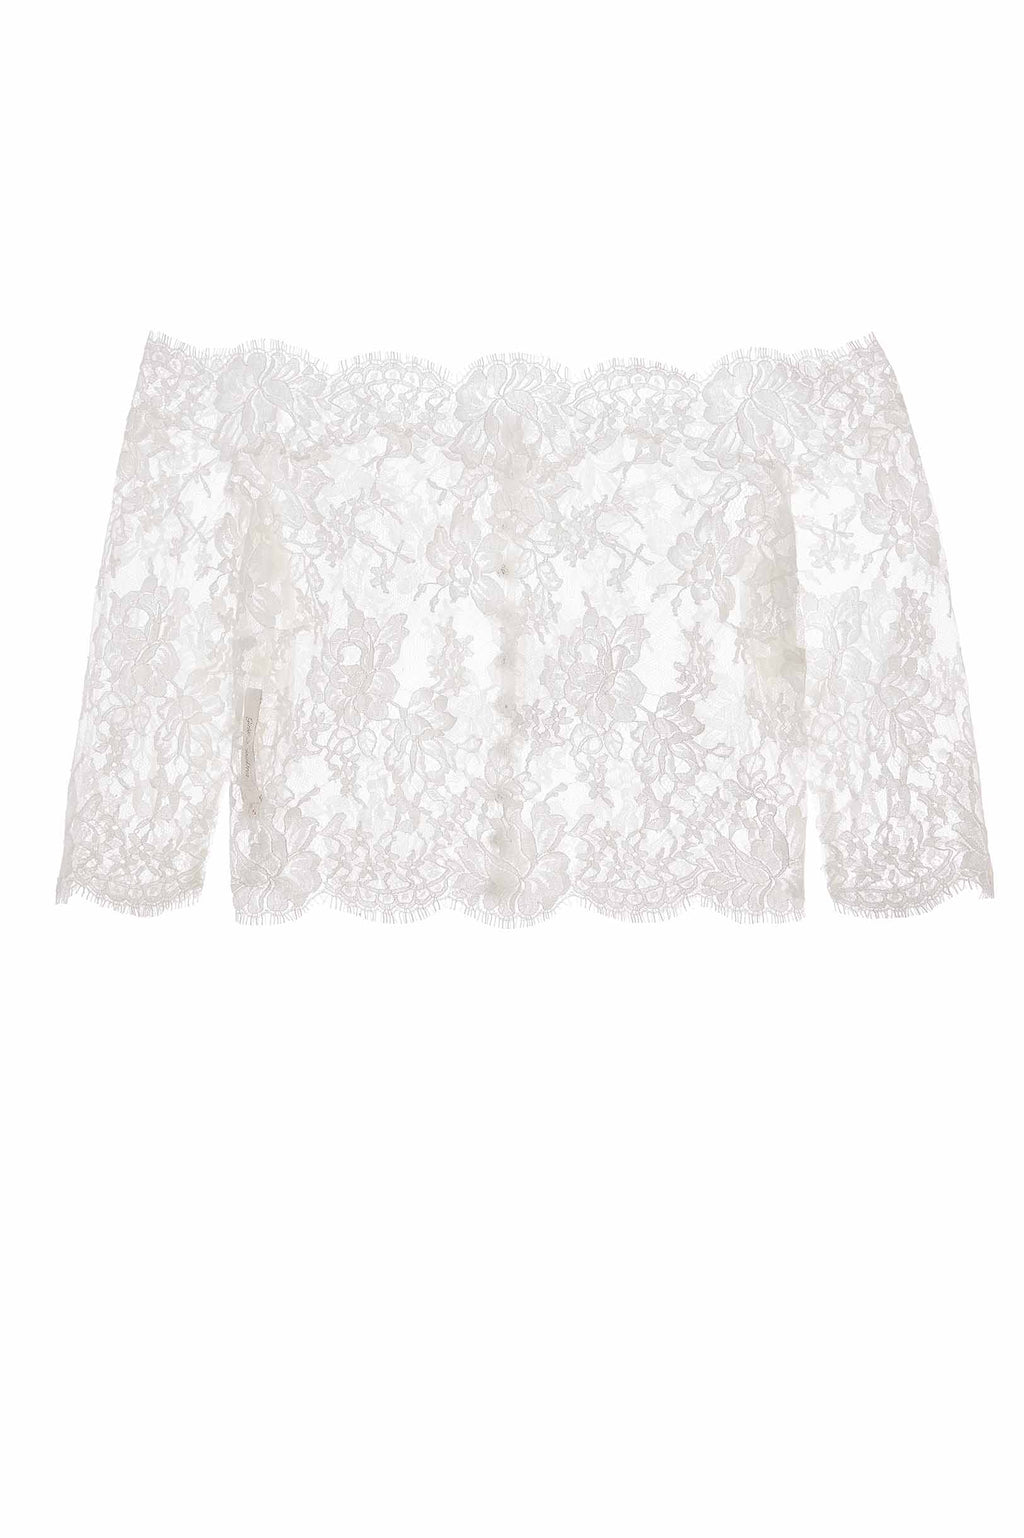 Dominique French lace off-the-shoulder topper in Ivory ...